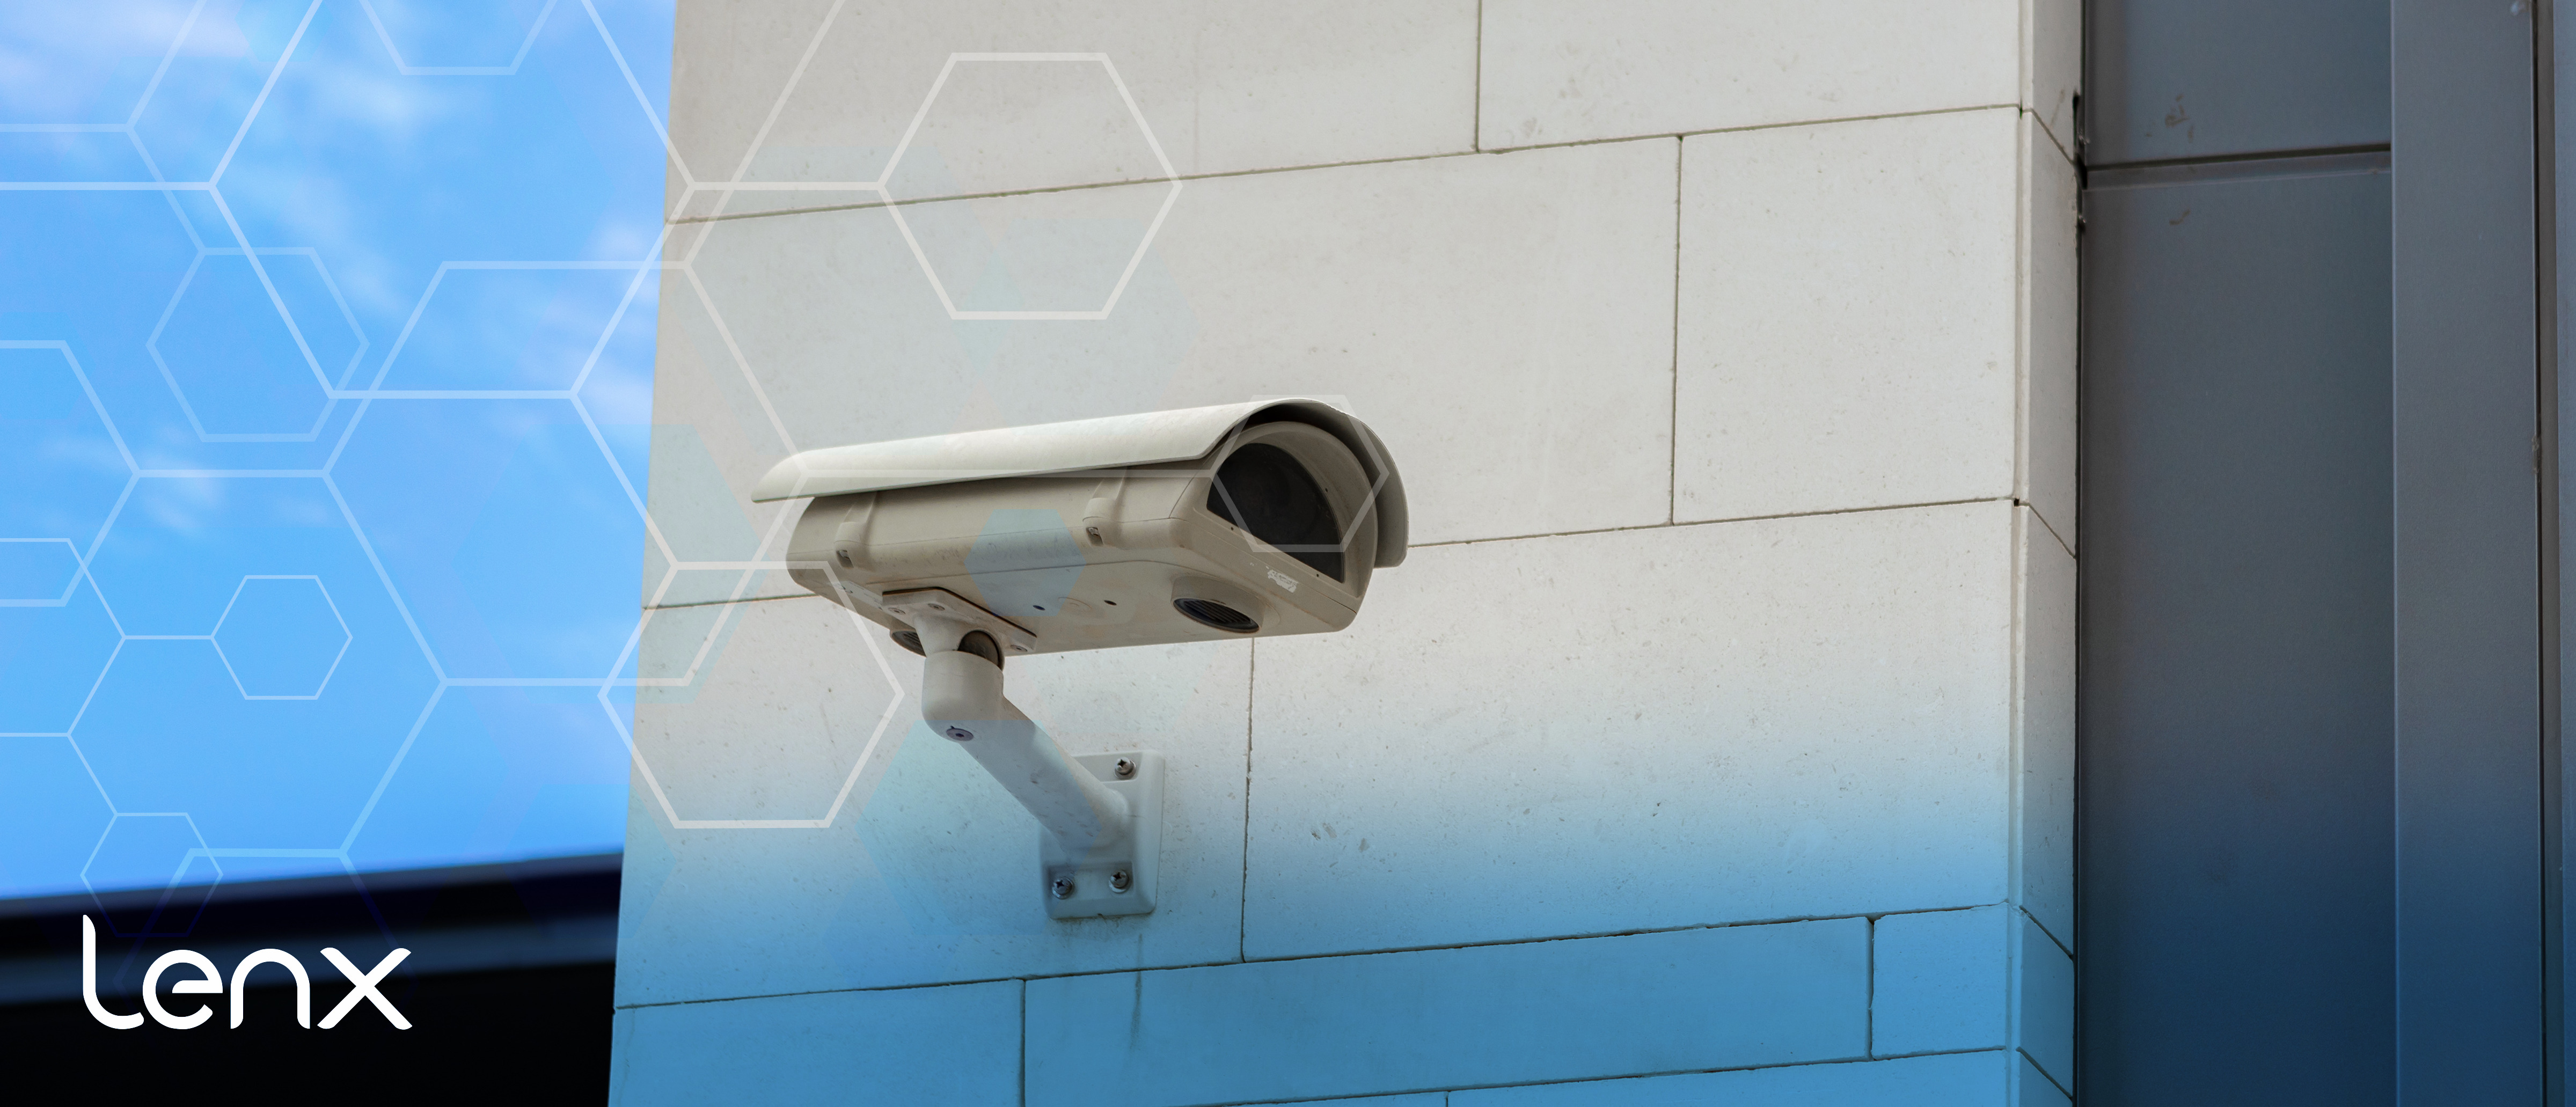 Why More And More Are Adopting AI Security, Active Shooter Detection Systems